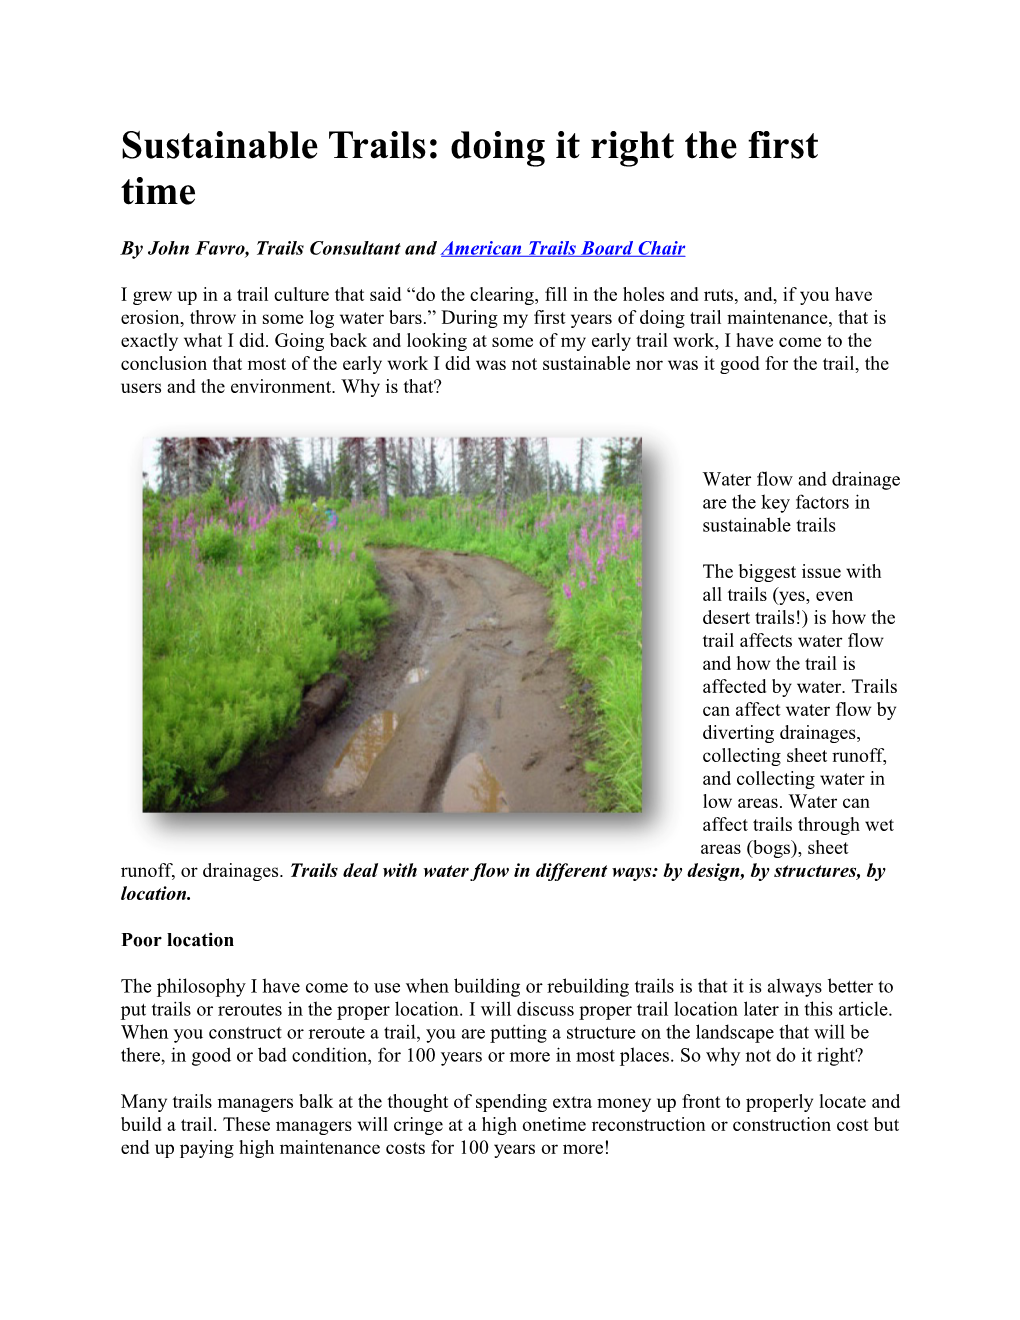 Sustainable Trails: Doing It Right the First Time